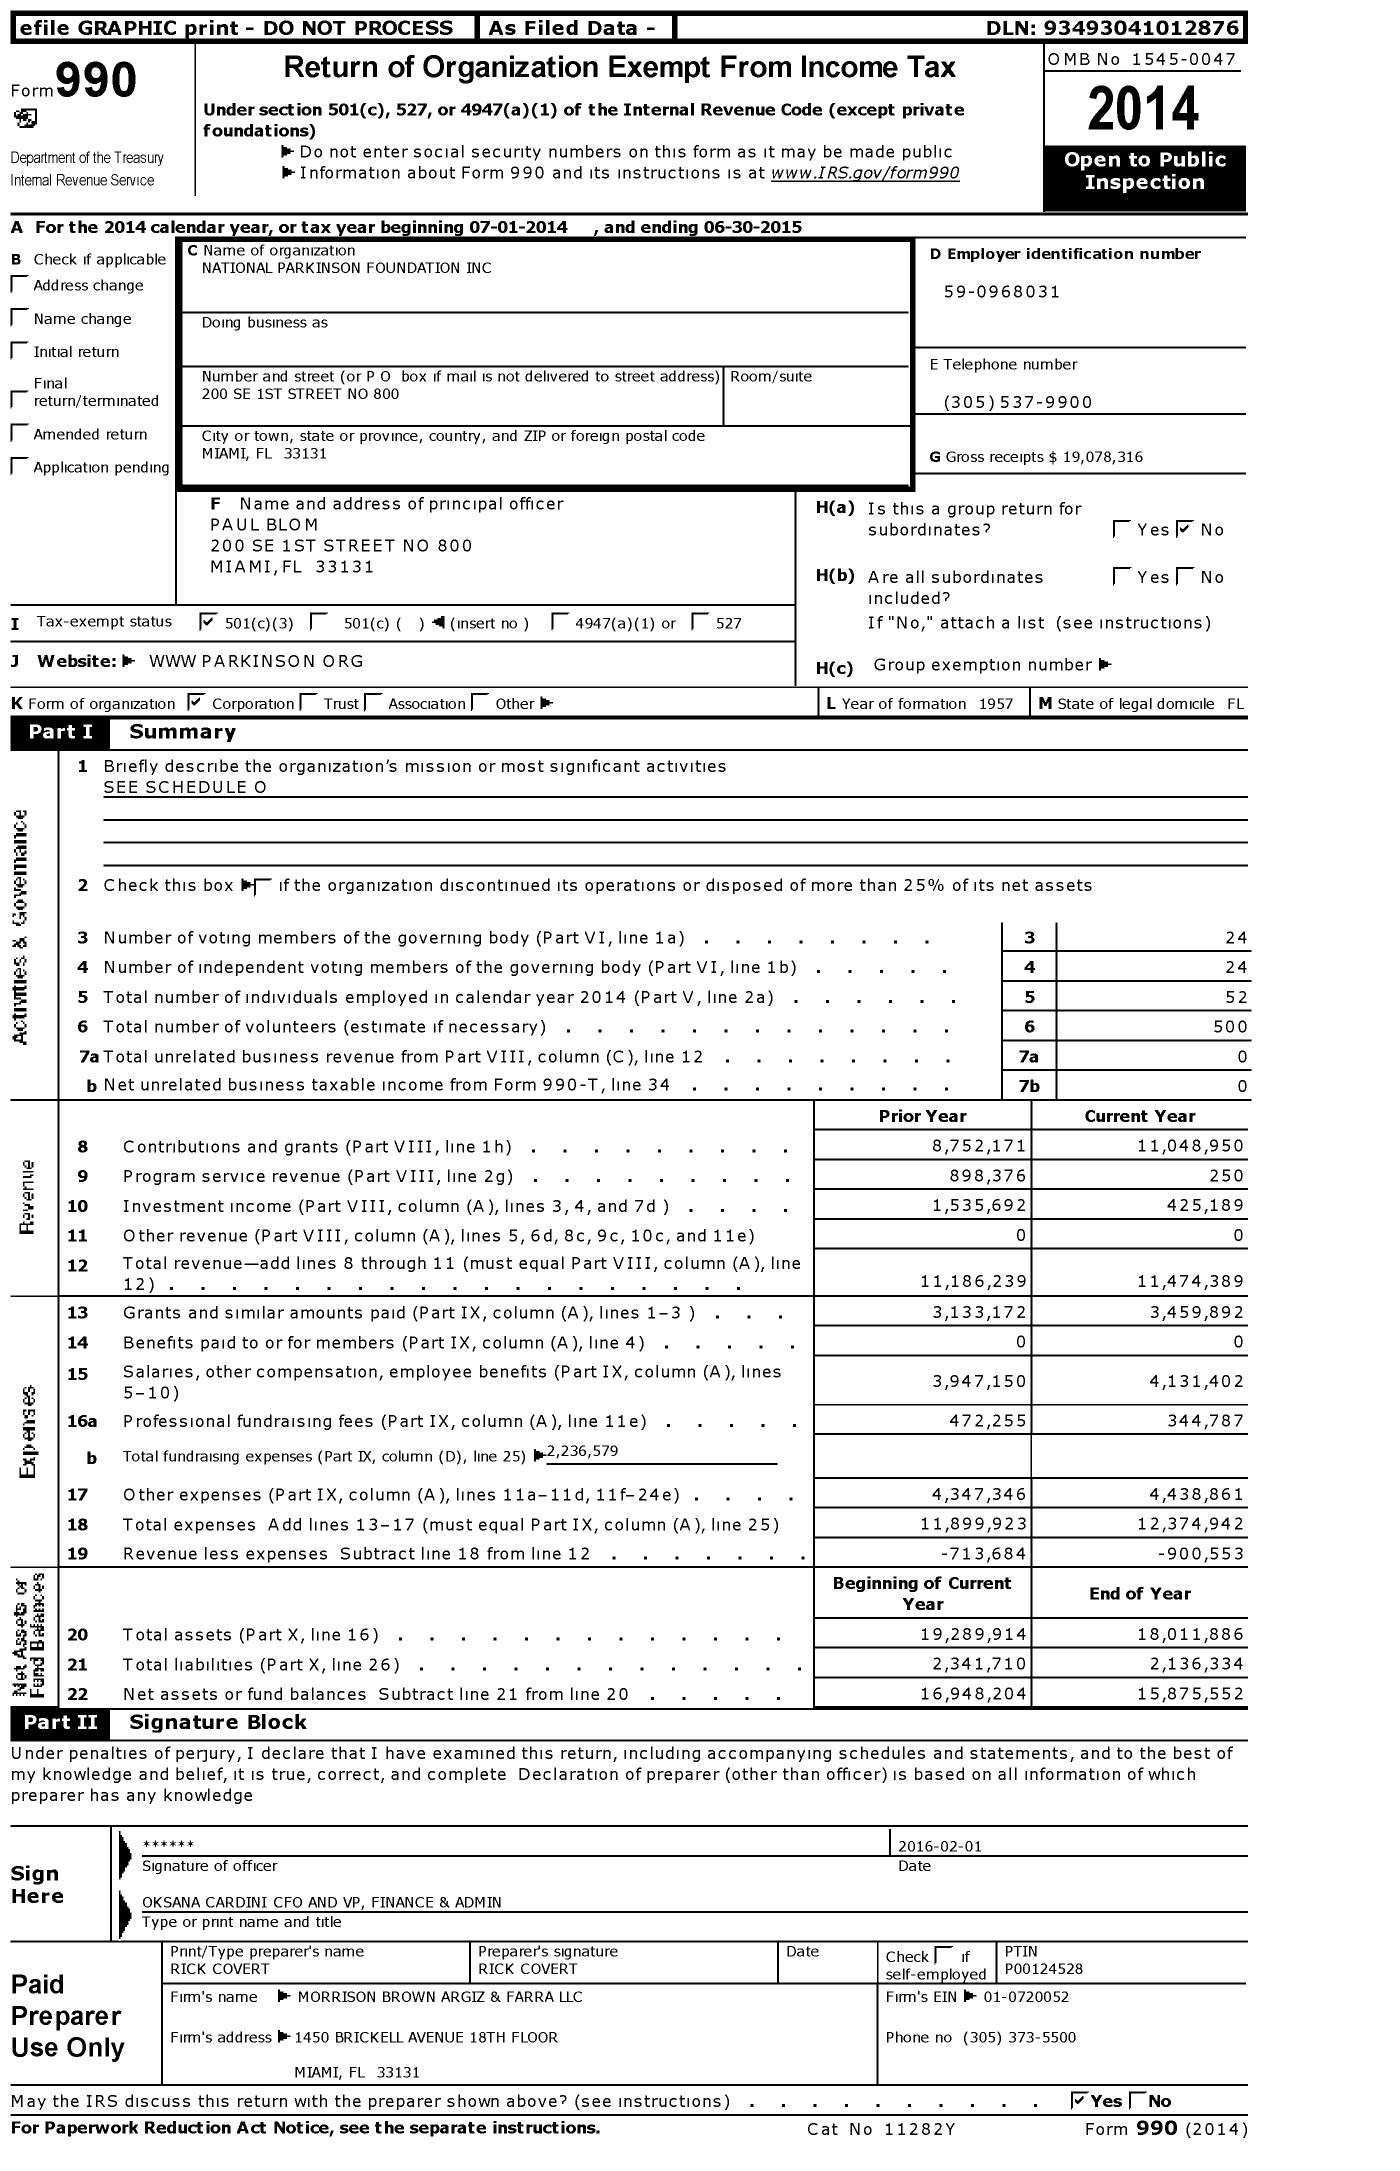 Image of first page of 2014 Form 990 for National Parkinson Foundation (NPF)